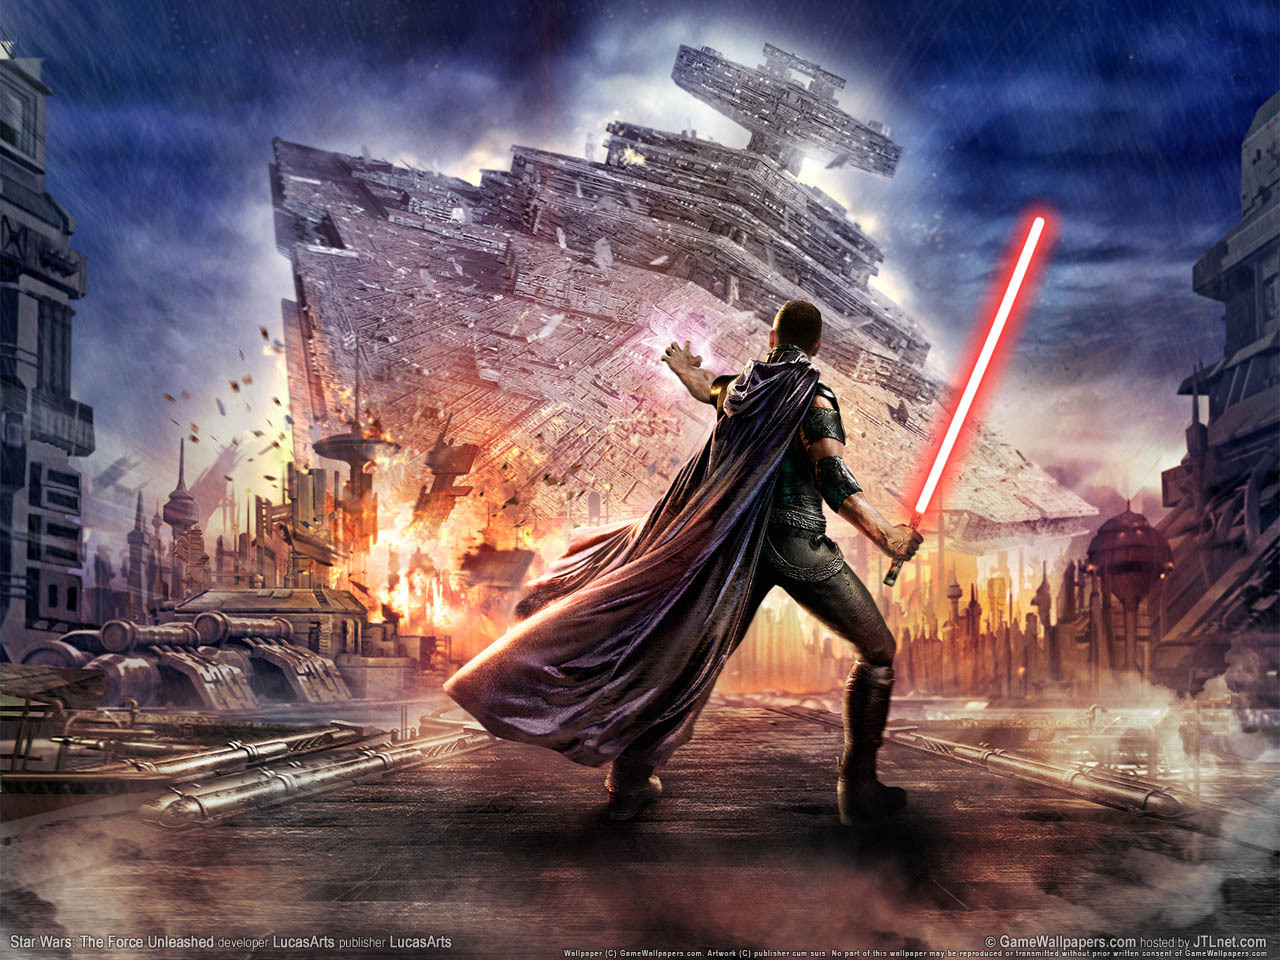 Star Wars The Force Unleased - Star WarsThe Force Unleashed